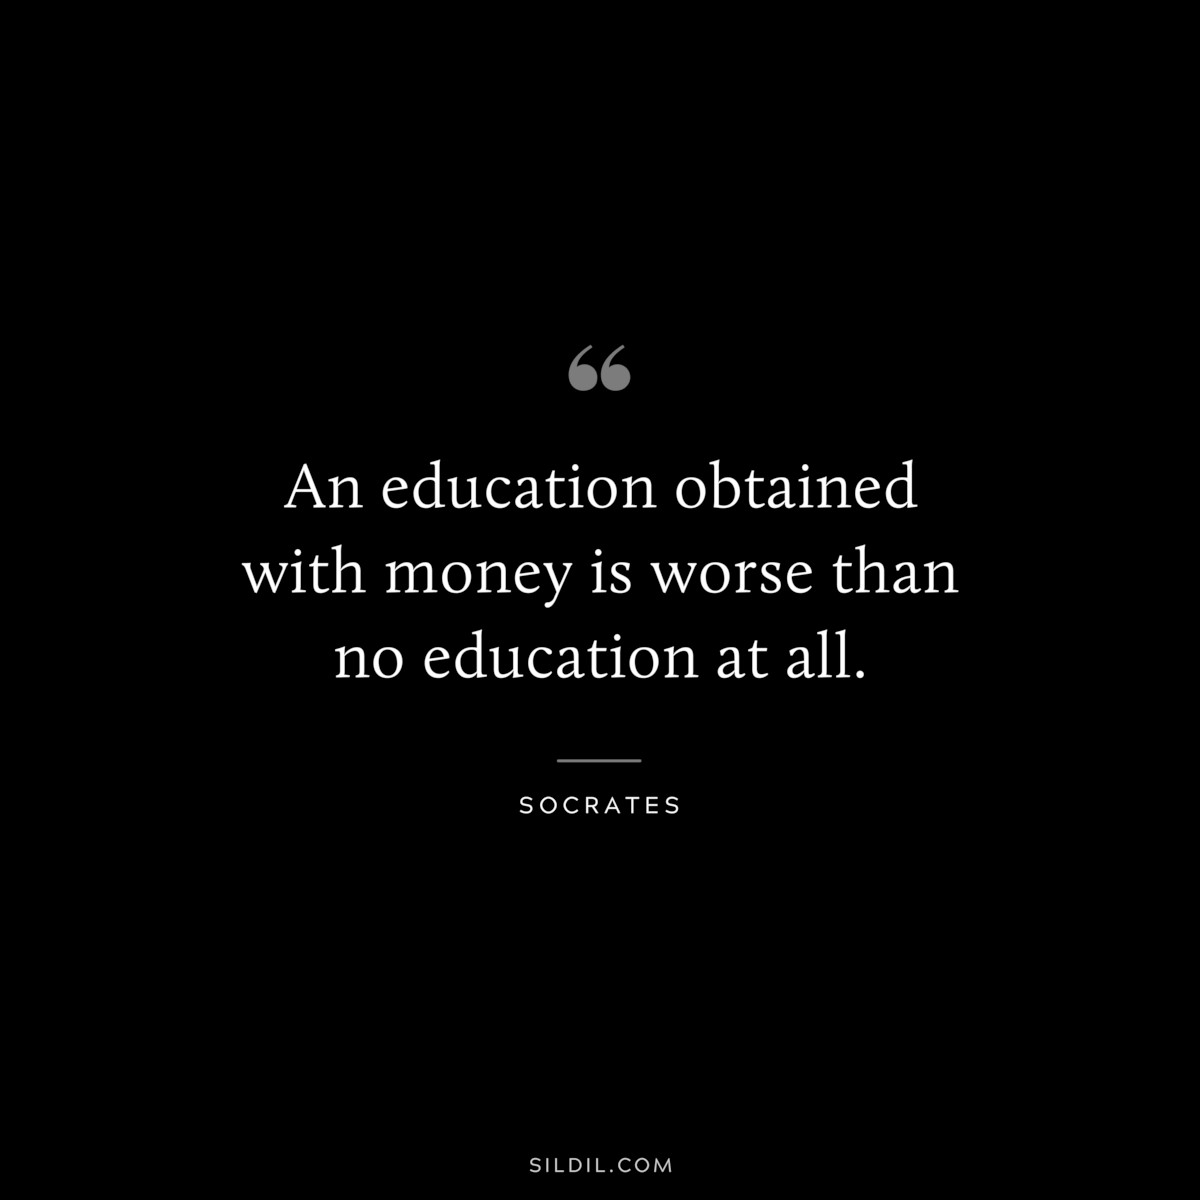 An education obtained with money is worse than no education at all. ― Socrates